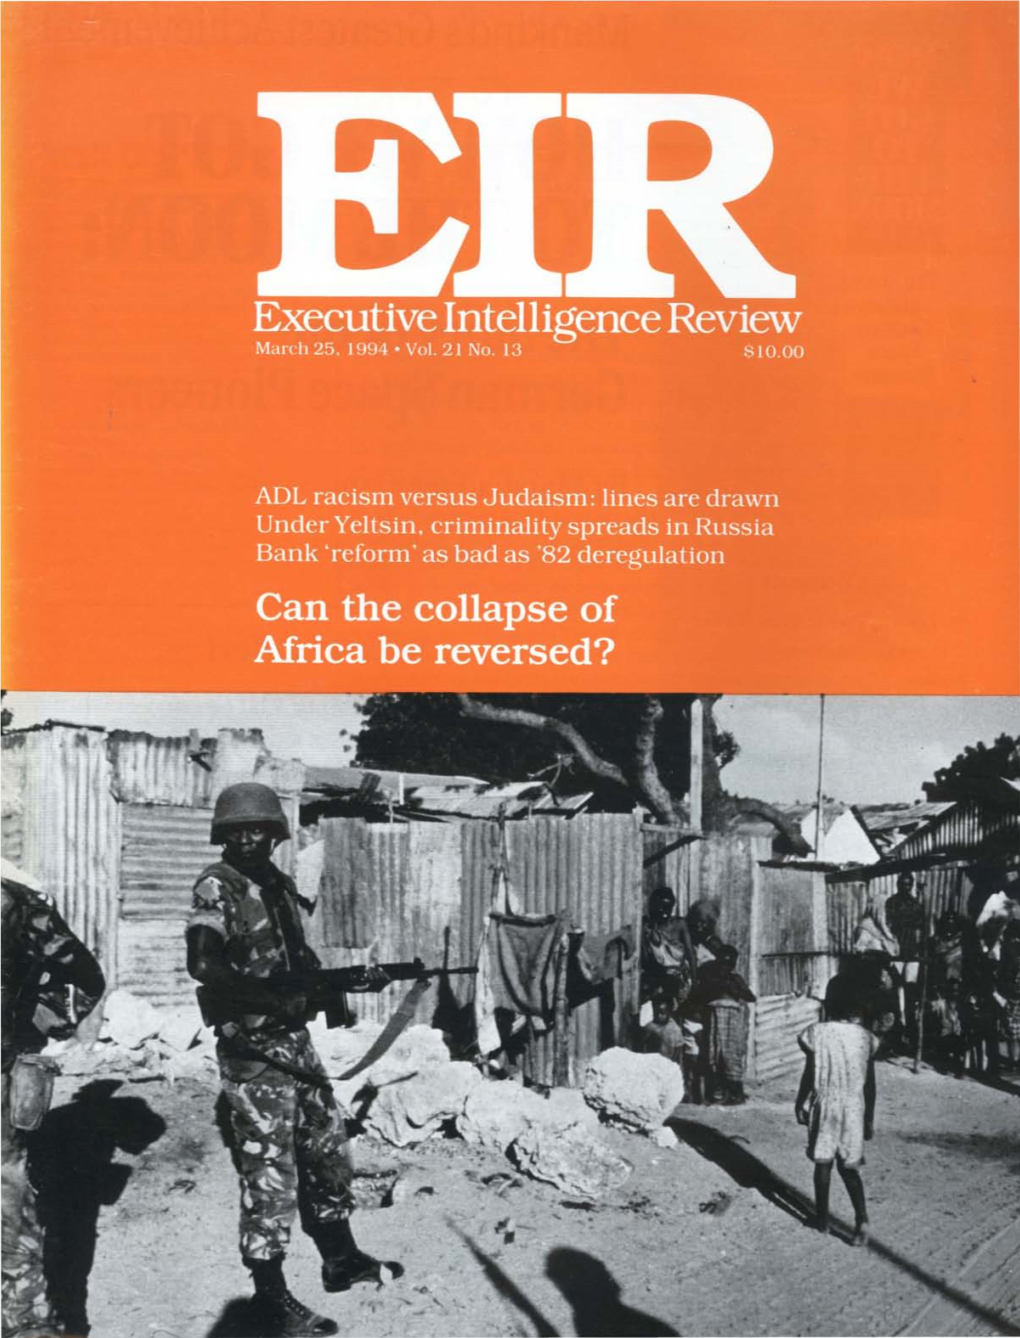 Executive Intelligence Review, Volume 21, Number 13, March 25